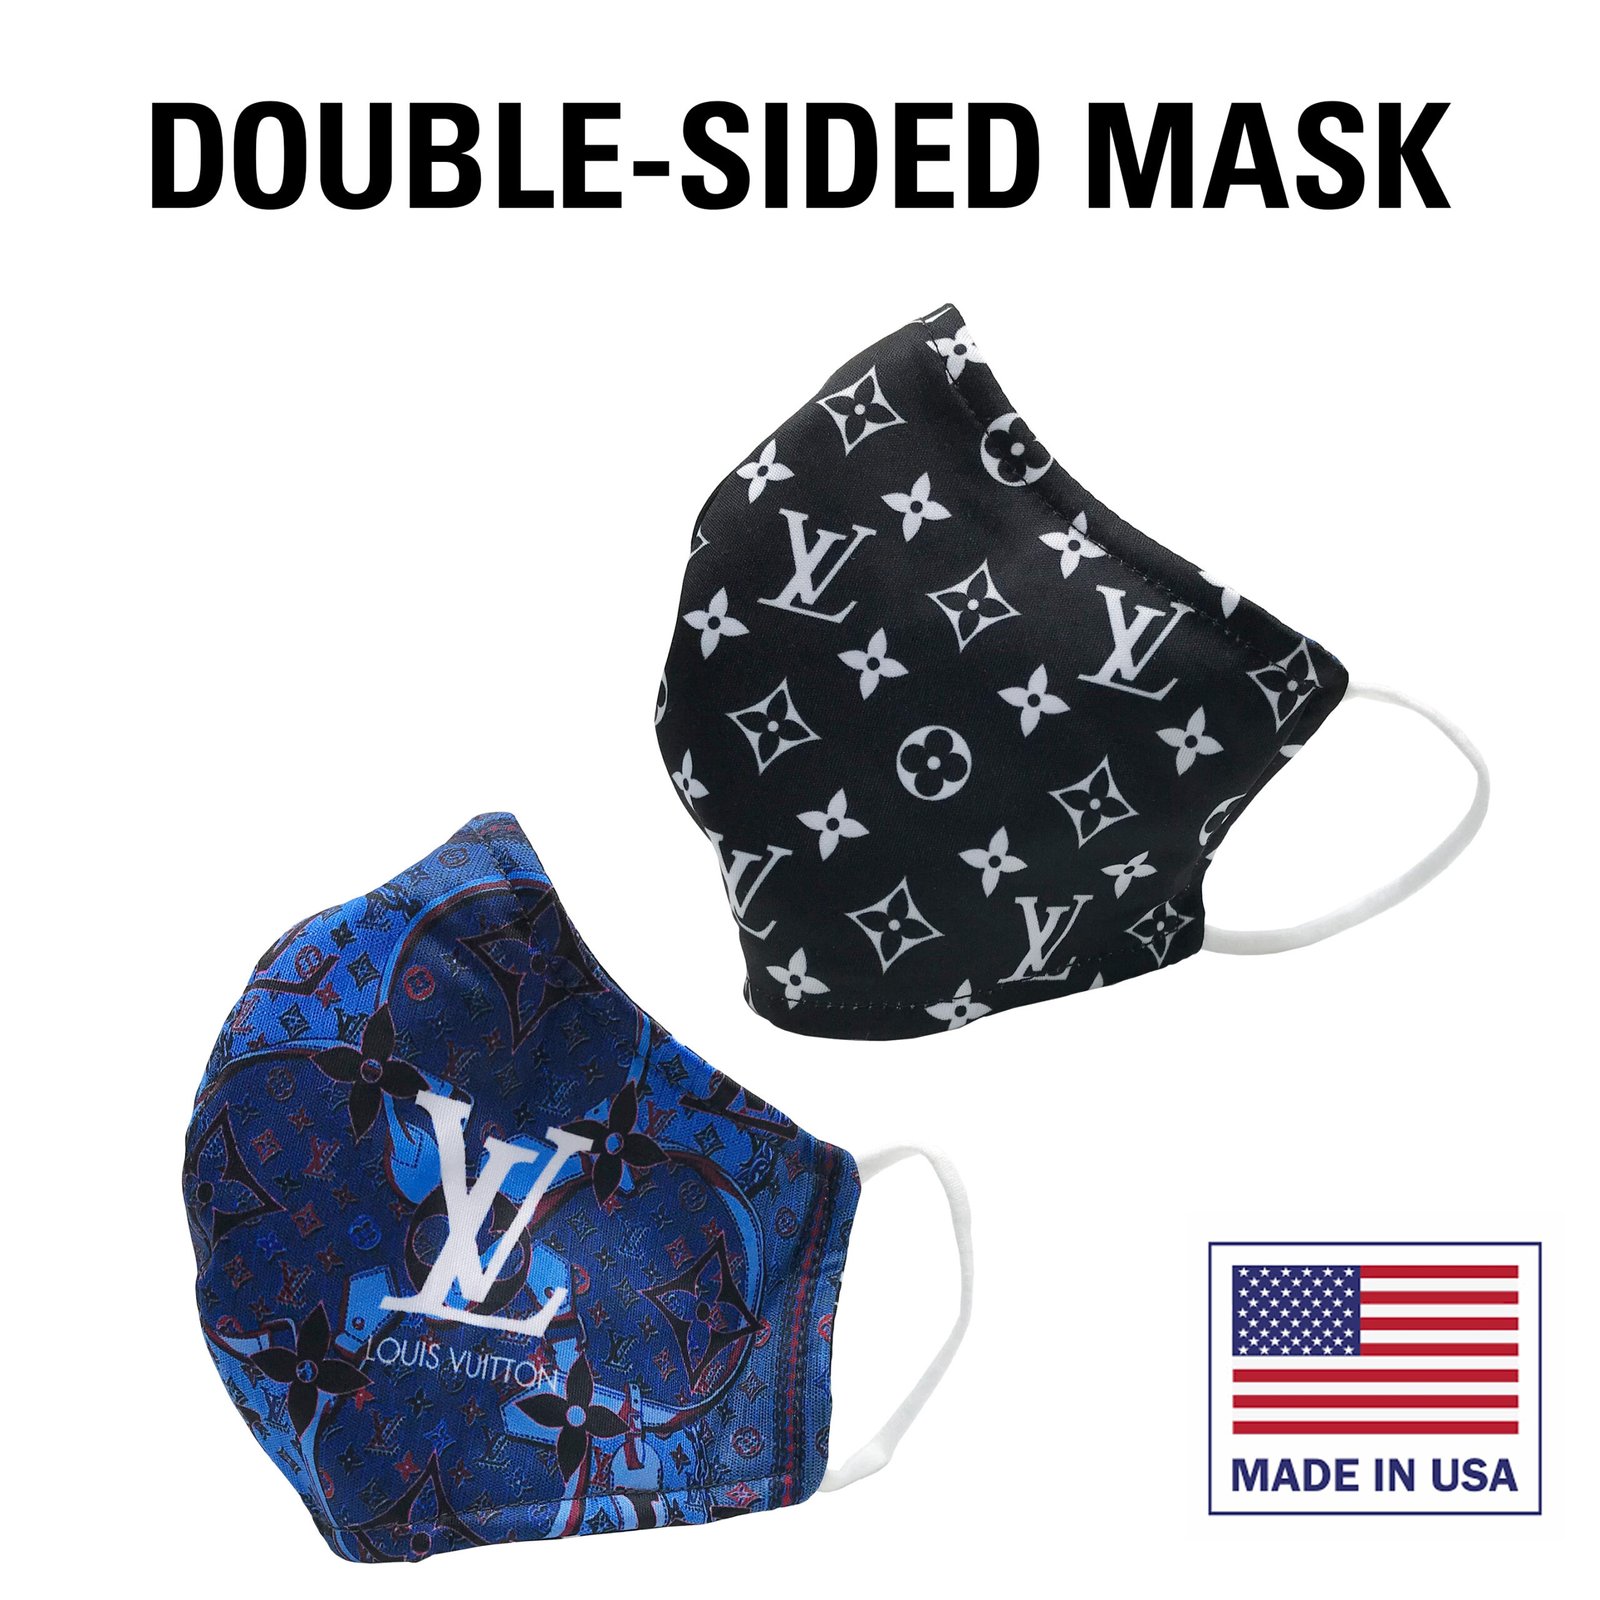 2020 Hot Reusable Protective Face Mask for LV Dust Masks for Louis